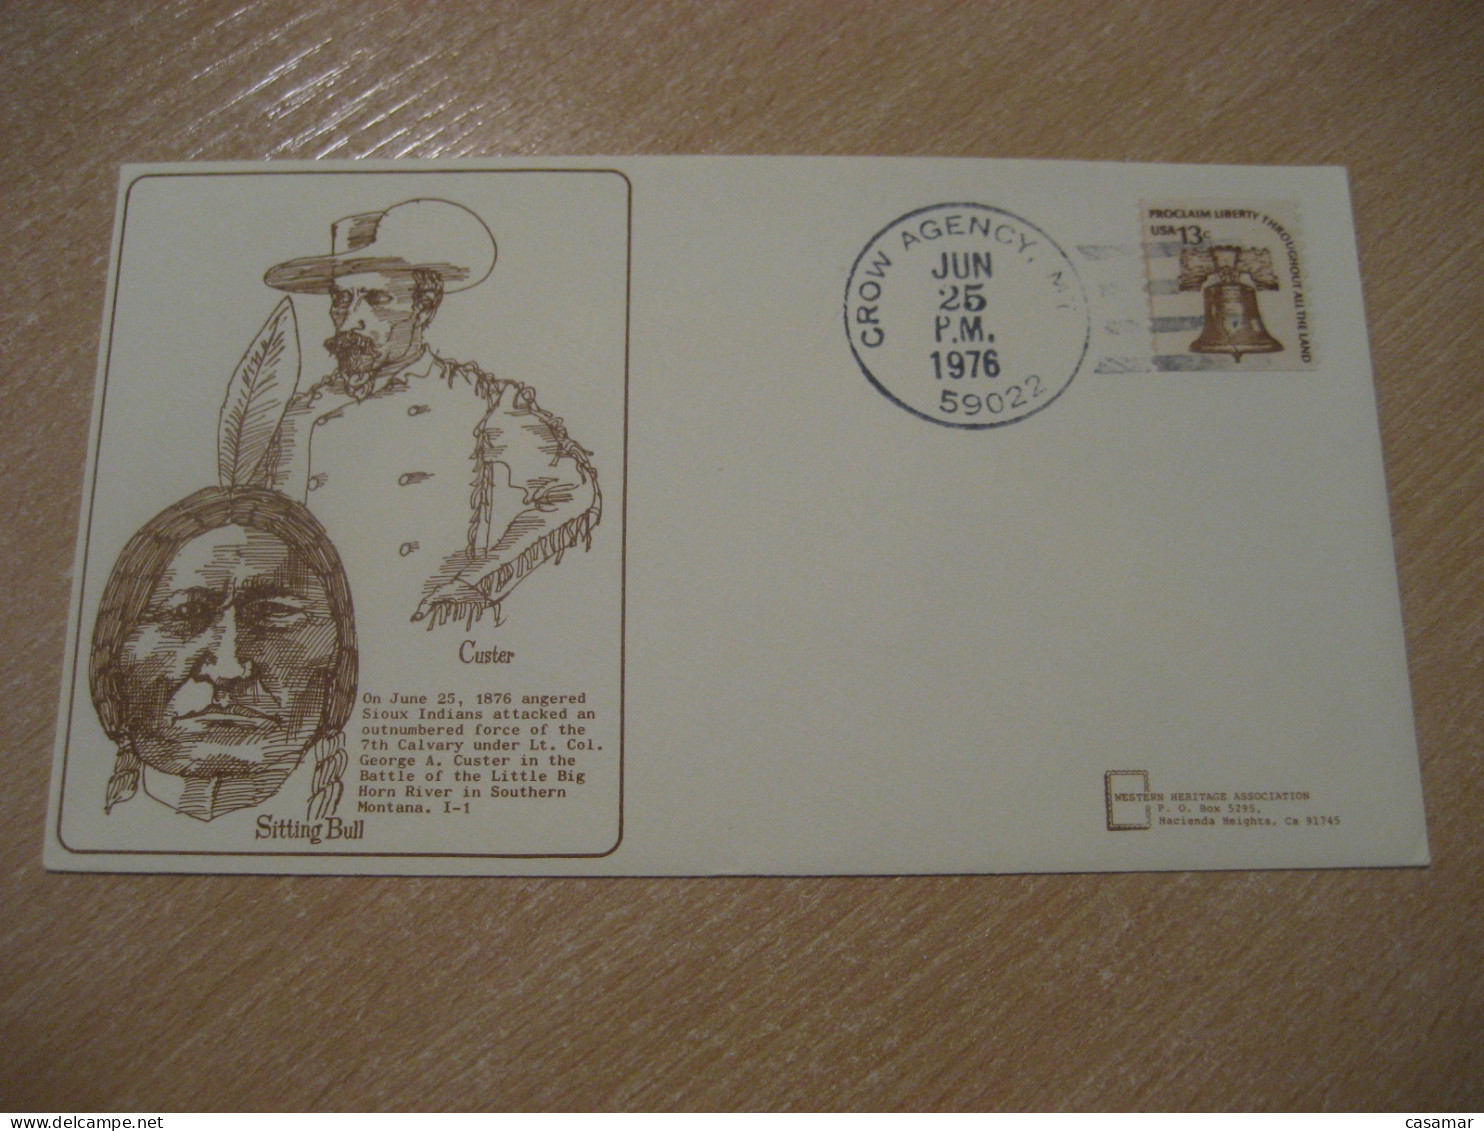 CROW AGENCY 1976 Custer Sitting Bull American Indians Indian Cancel Cover USA Indigenous Native History - American Indians